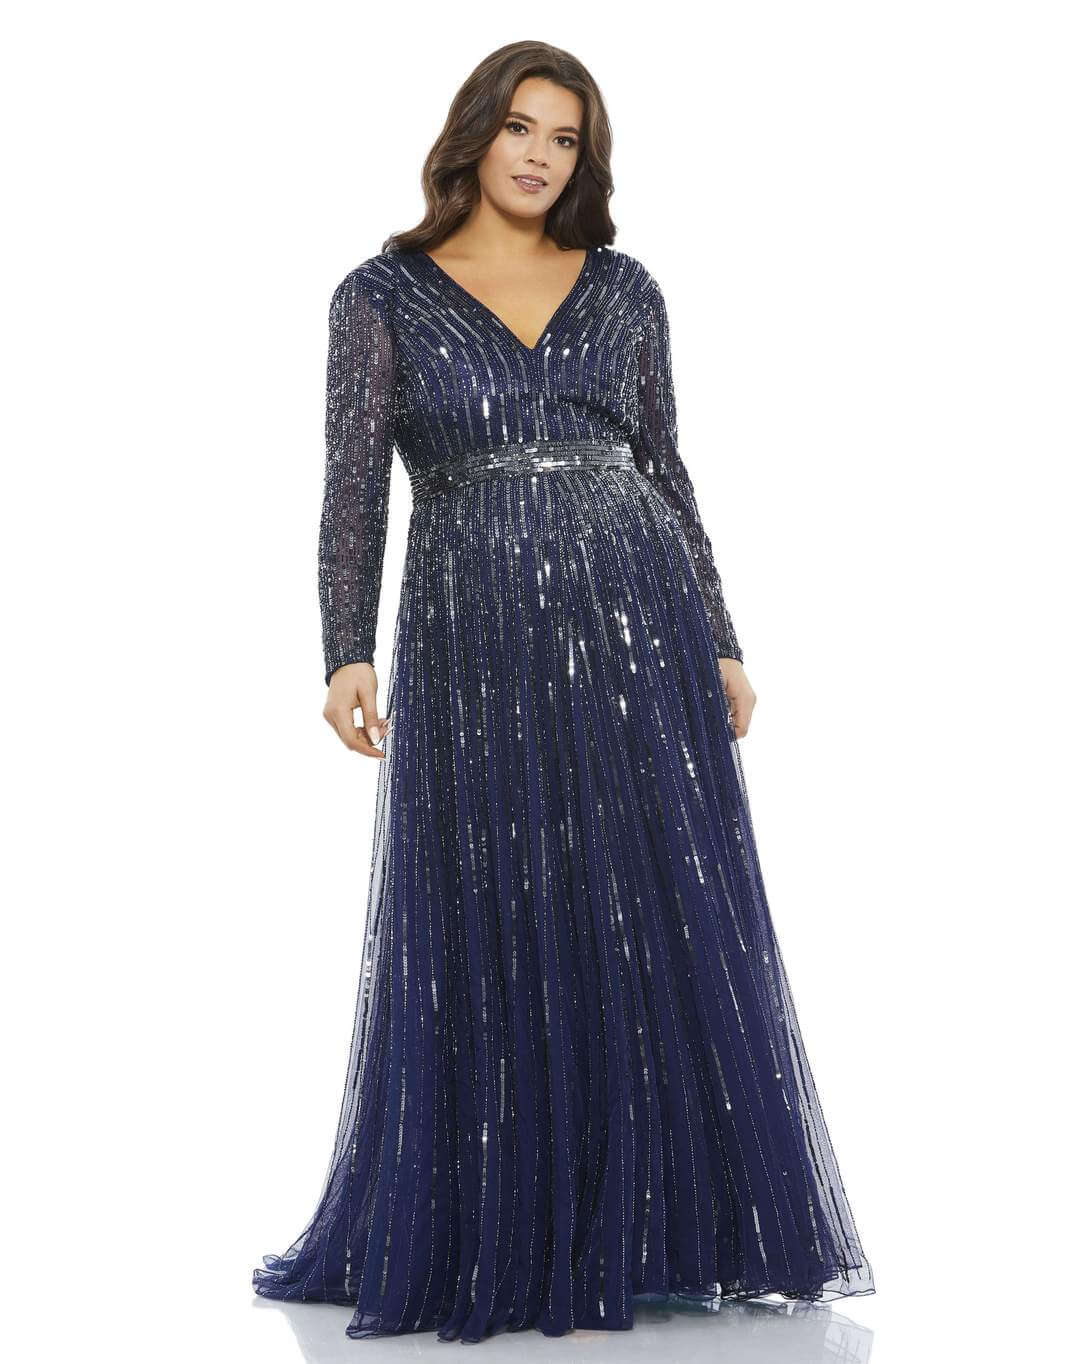 Mac Duggal Style#5520, Embellished Illusion Long Sleeve V Neck A Line Gown, A line,beaded,Curvy Girl,Floor Length,long sleeve,Sequin,V-Neck, $875.00